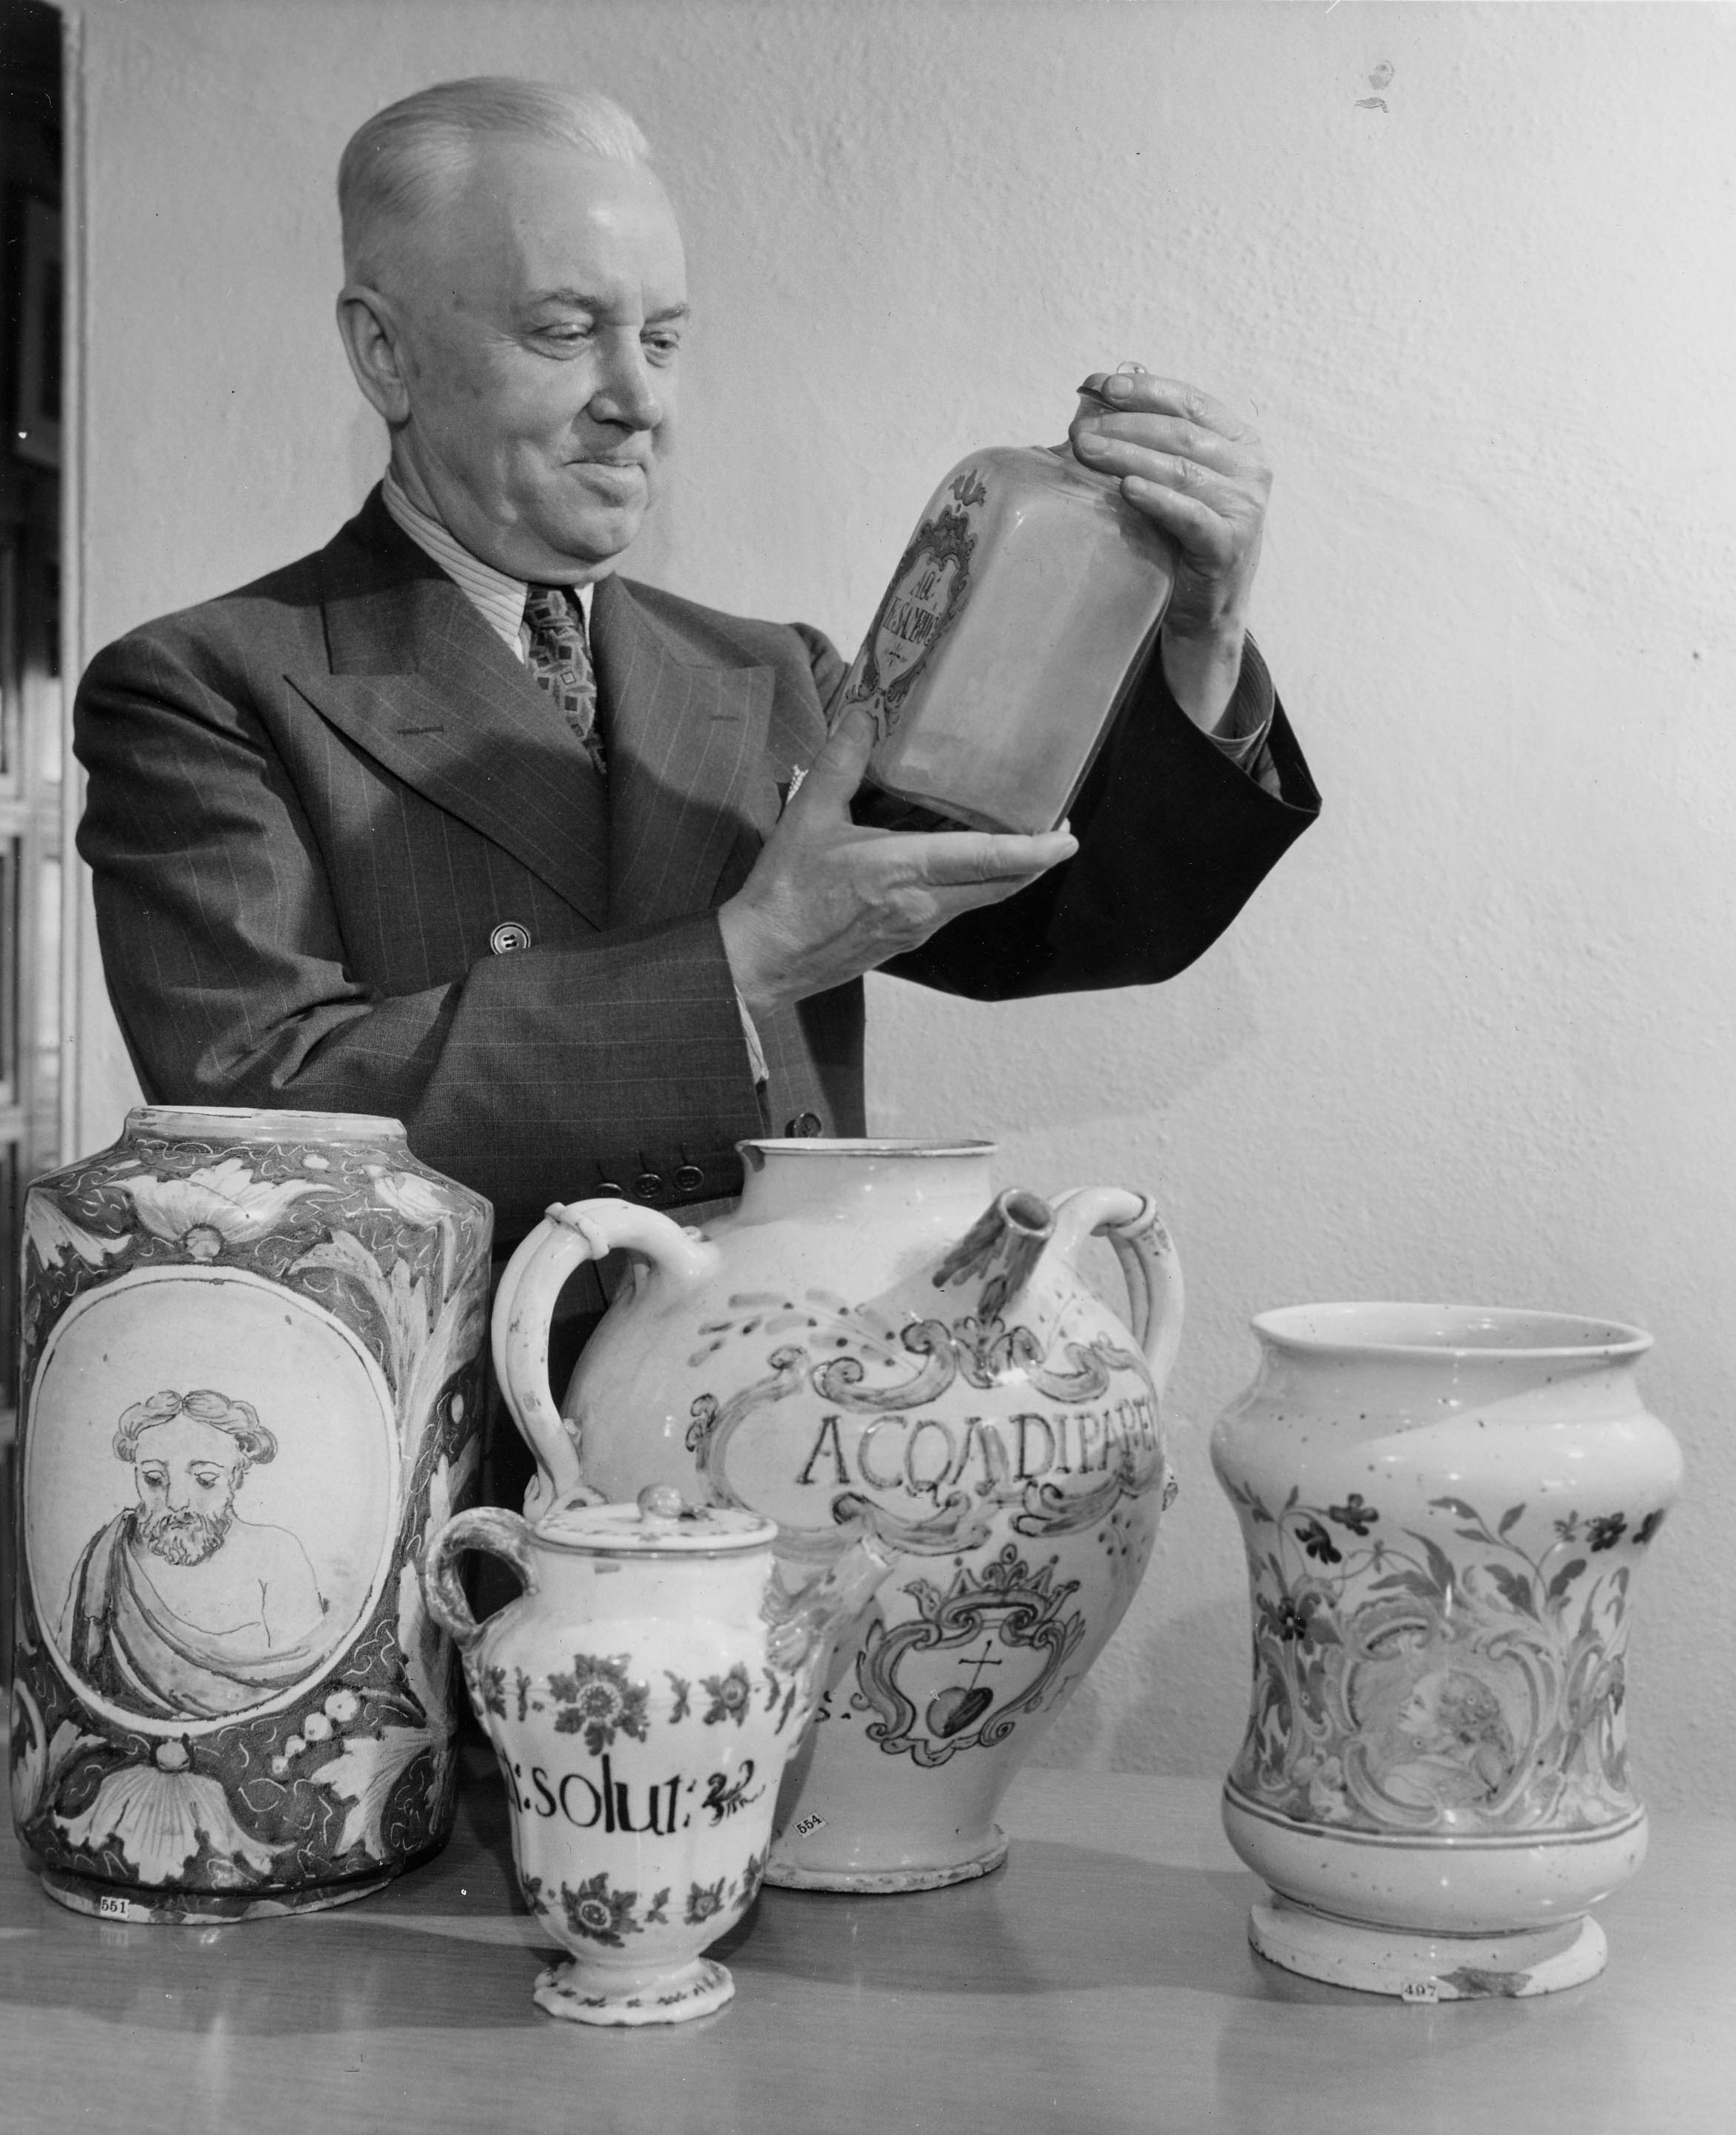 Charles Whitebread Examines Jars from the Squibb Collection